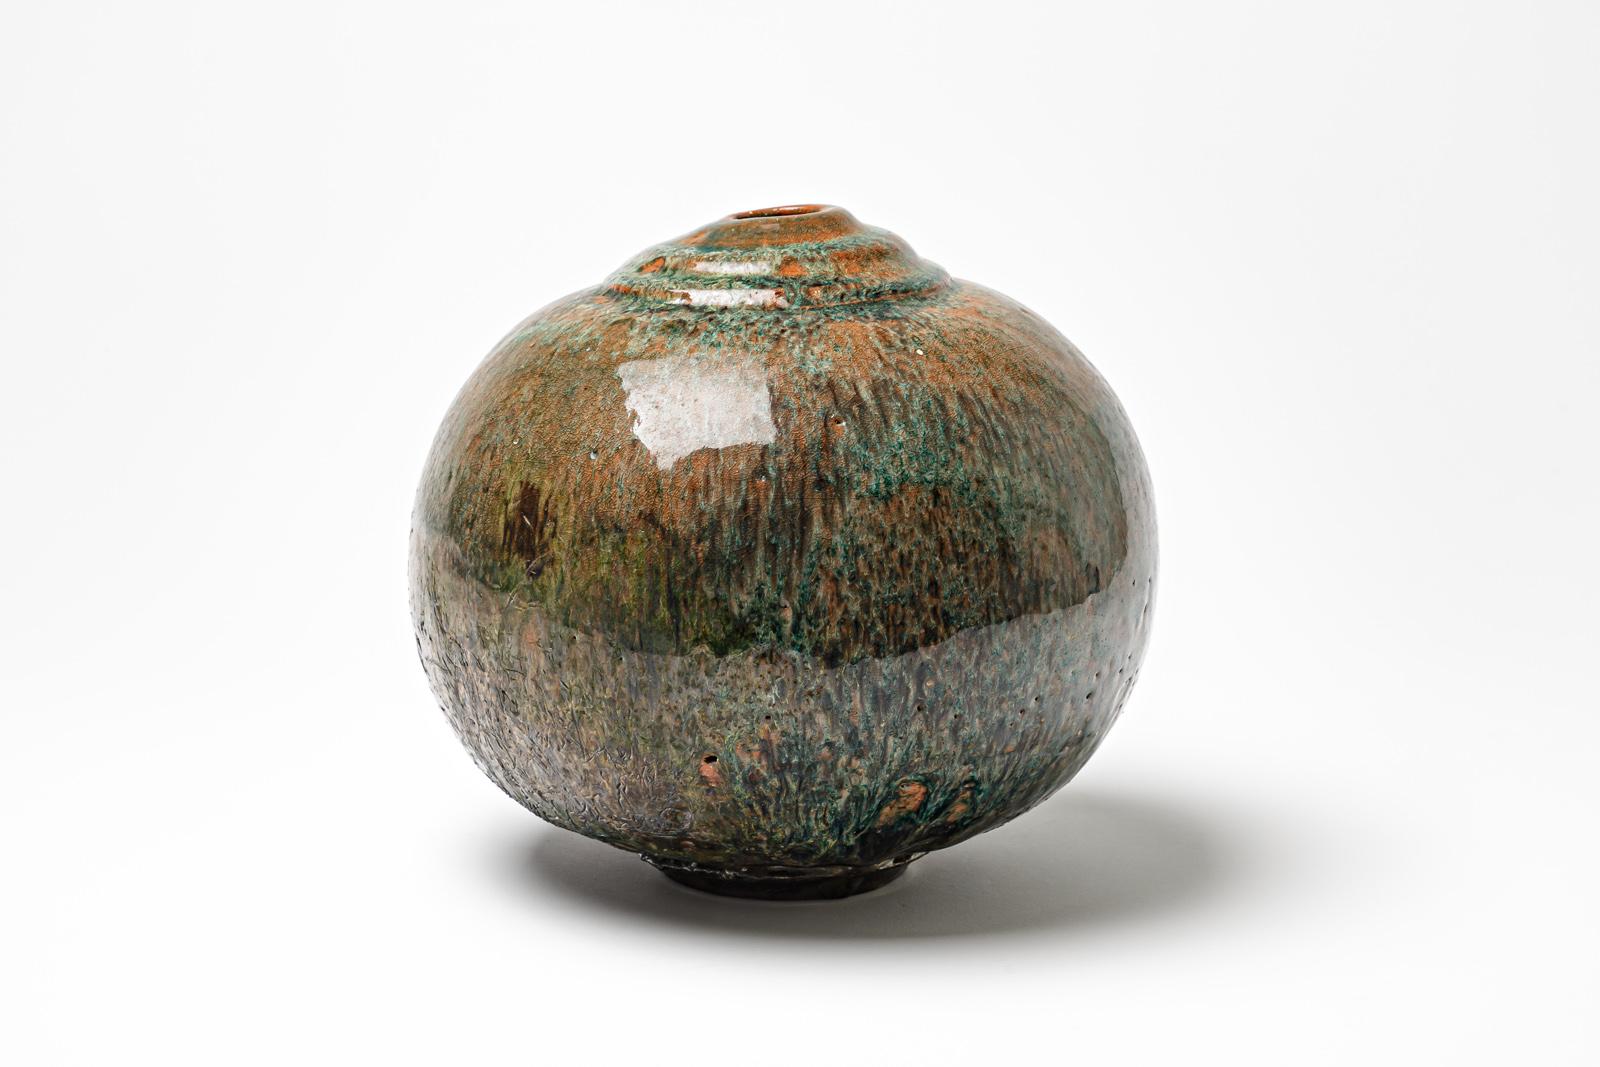 Beaux Arts Brown/red and green glazed ceramic vase by Gisèle Buthod Garçon, circa 1980-1990 For Sale